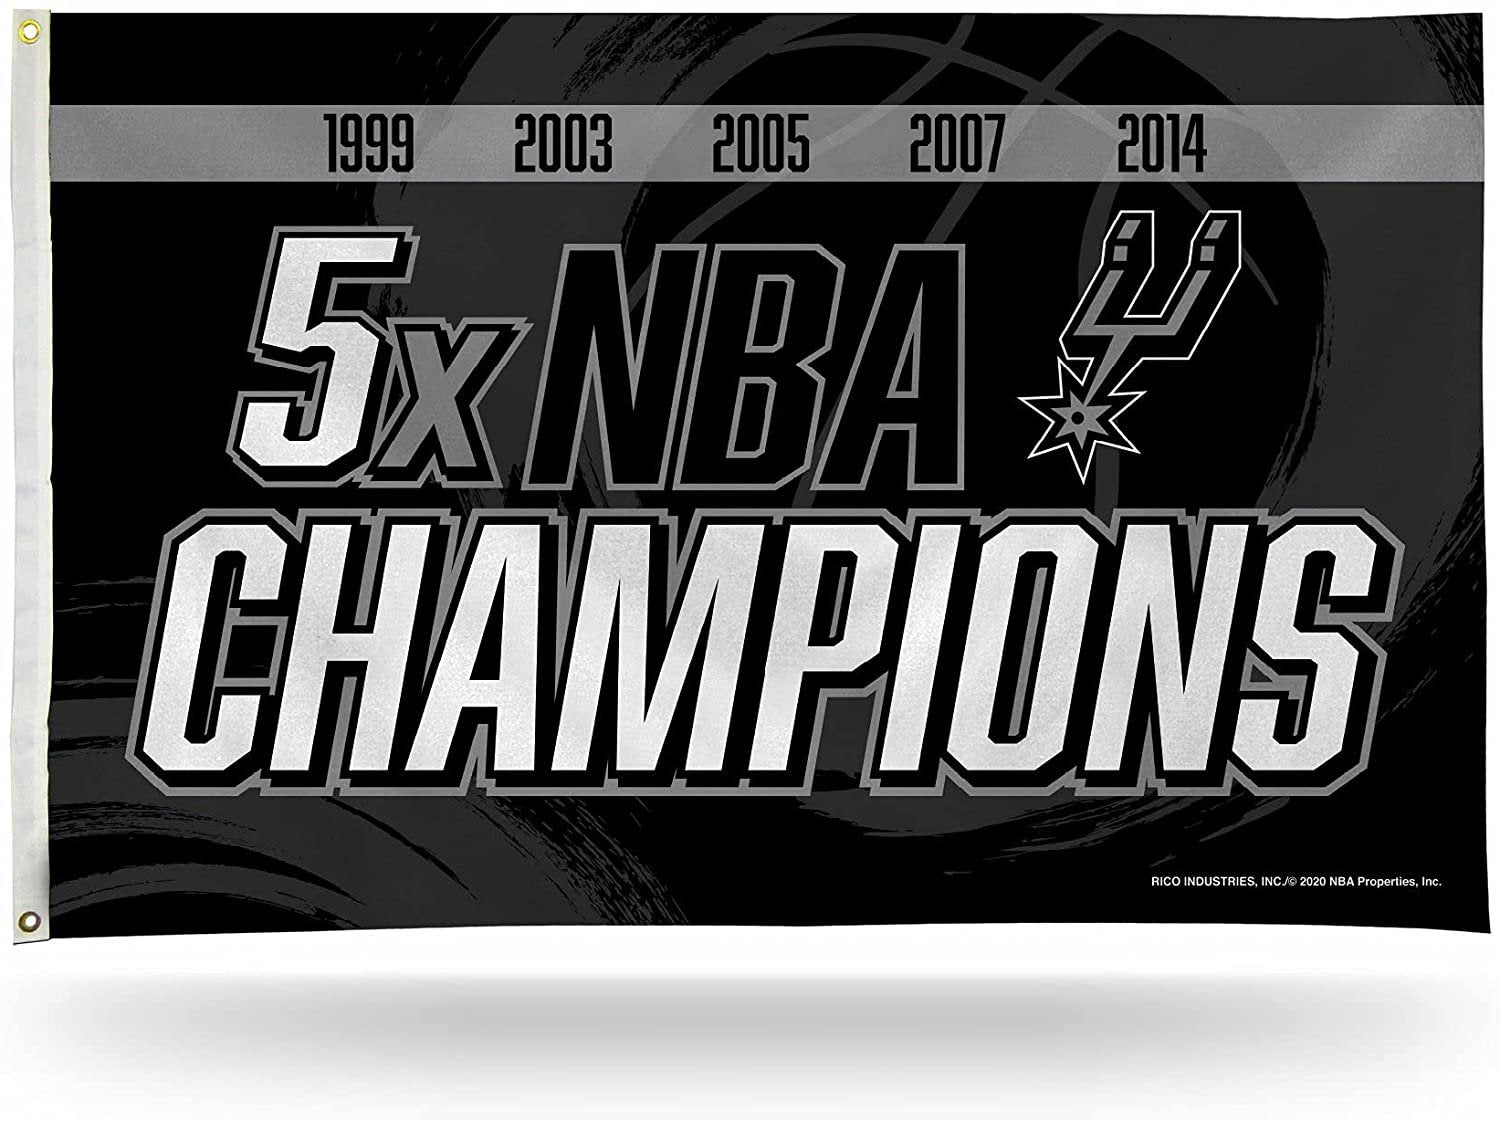 San Antonio Spurs Premium 3x5 feet Flag Banner, 5-Time Champions, Metal Grommets, Outdoor Indoor, Single Sided